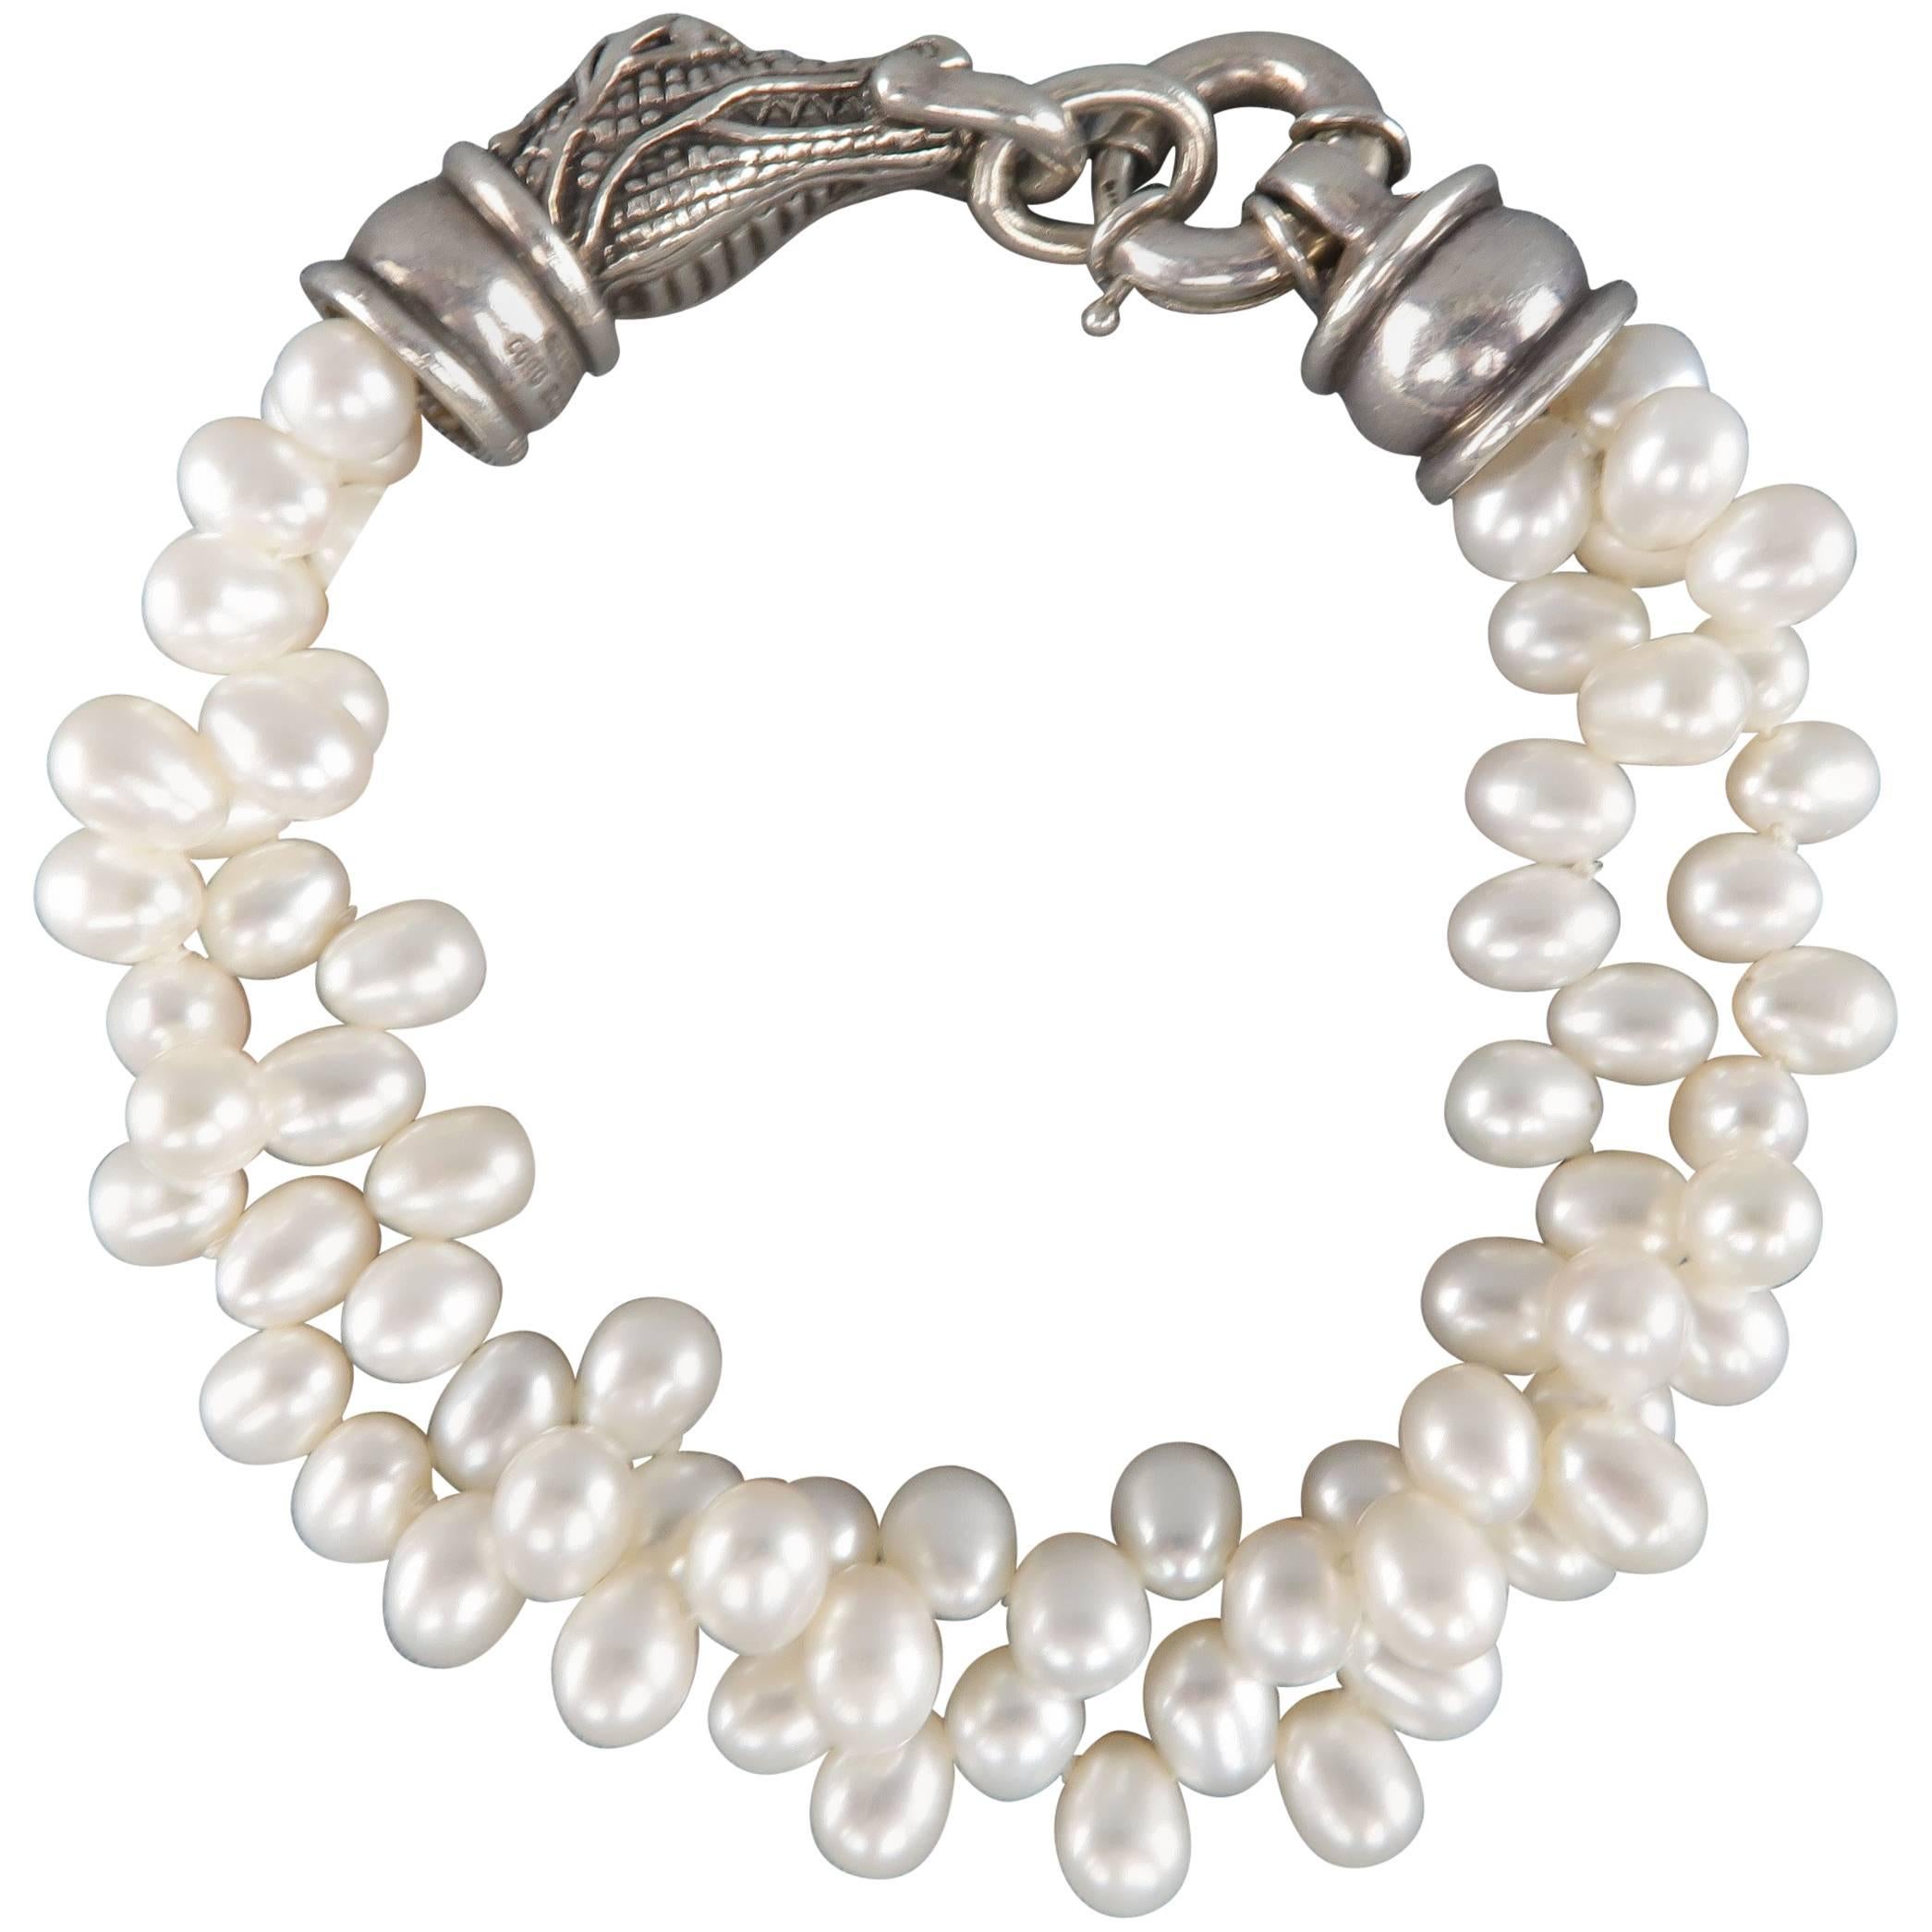 Kieselstein-Cord Bracelet Off White Pearls and Sterling Silver Alligator Clasp